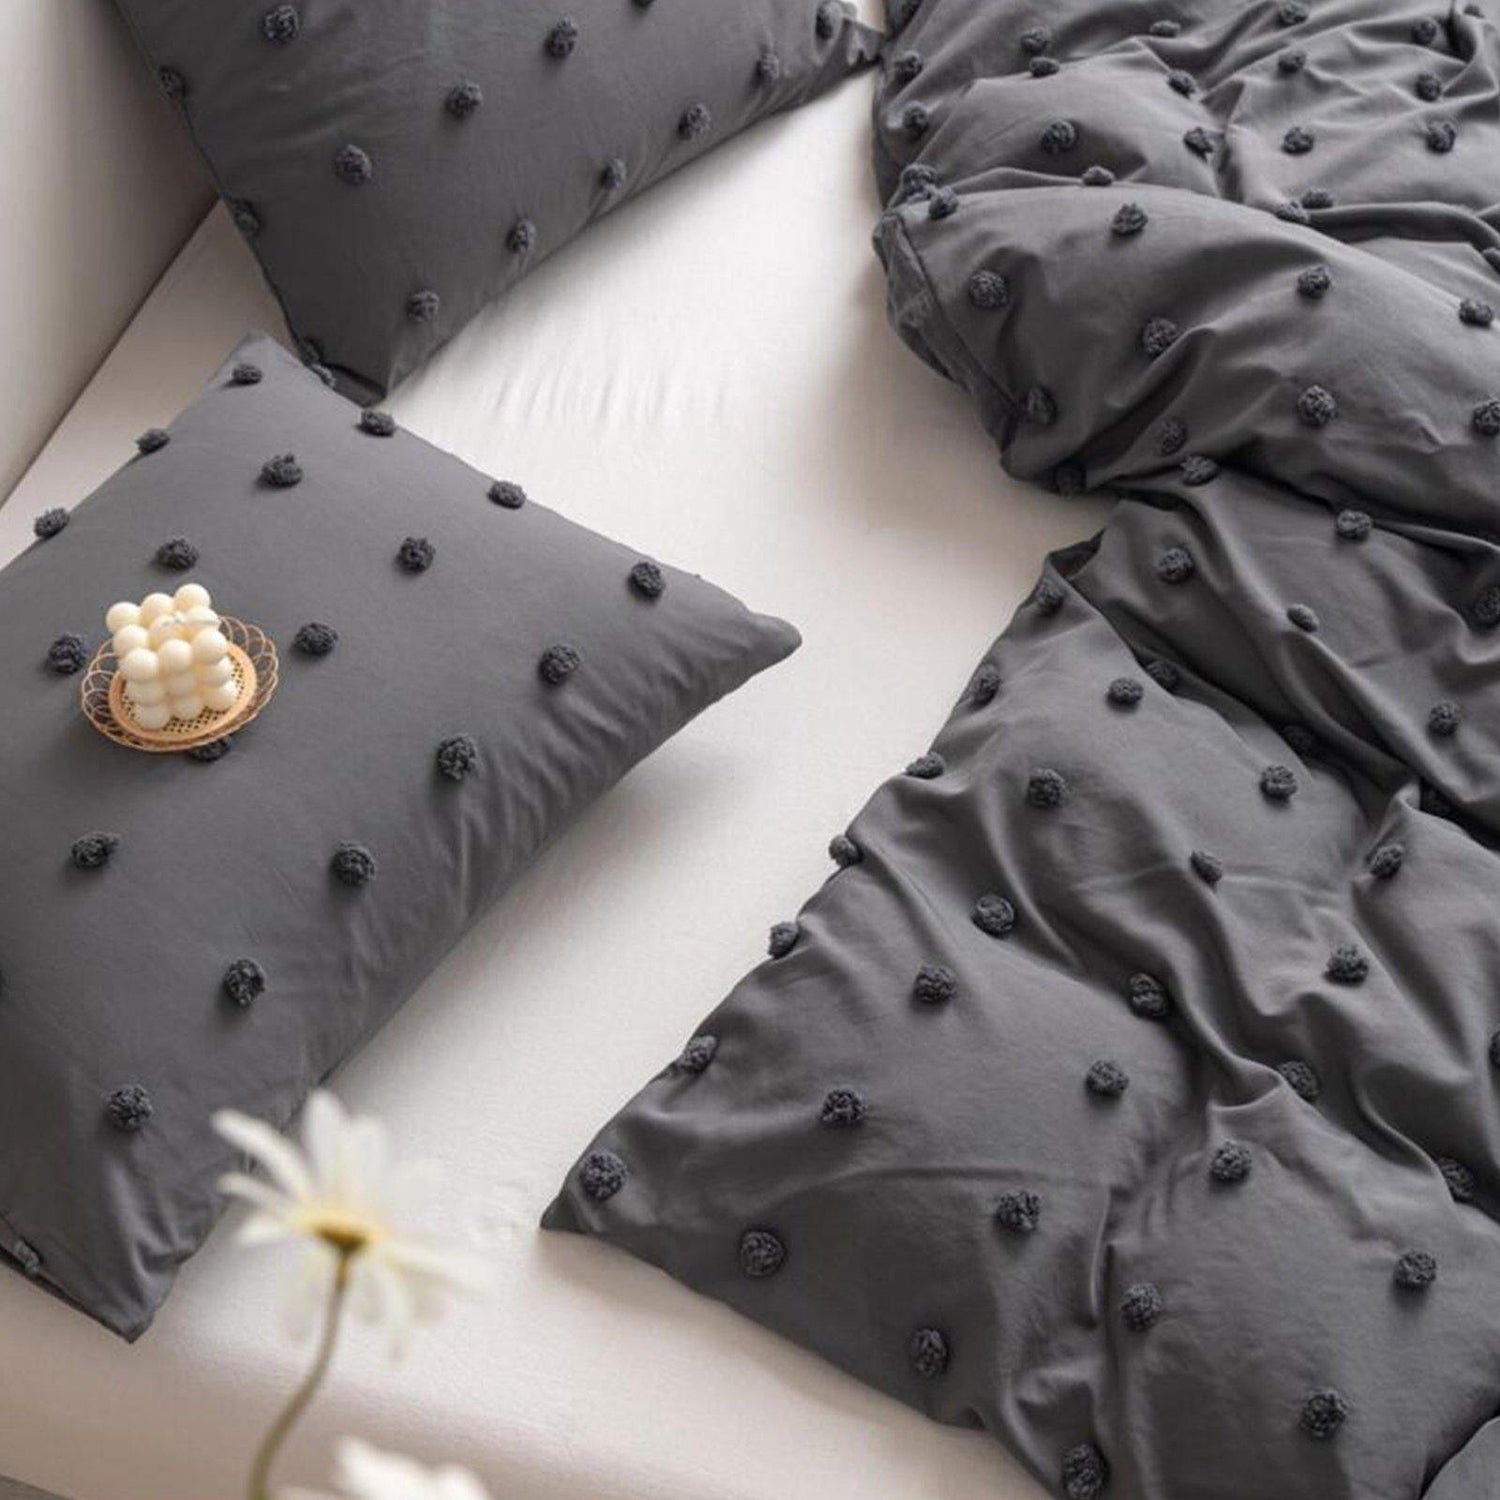 Dark Gray Tufted Dot comforter set bedroom bedding 3 Pieces Bedding Comforter with 2 Pillow Cases suitable for the whole season - Wongs bedding